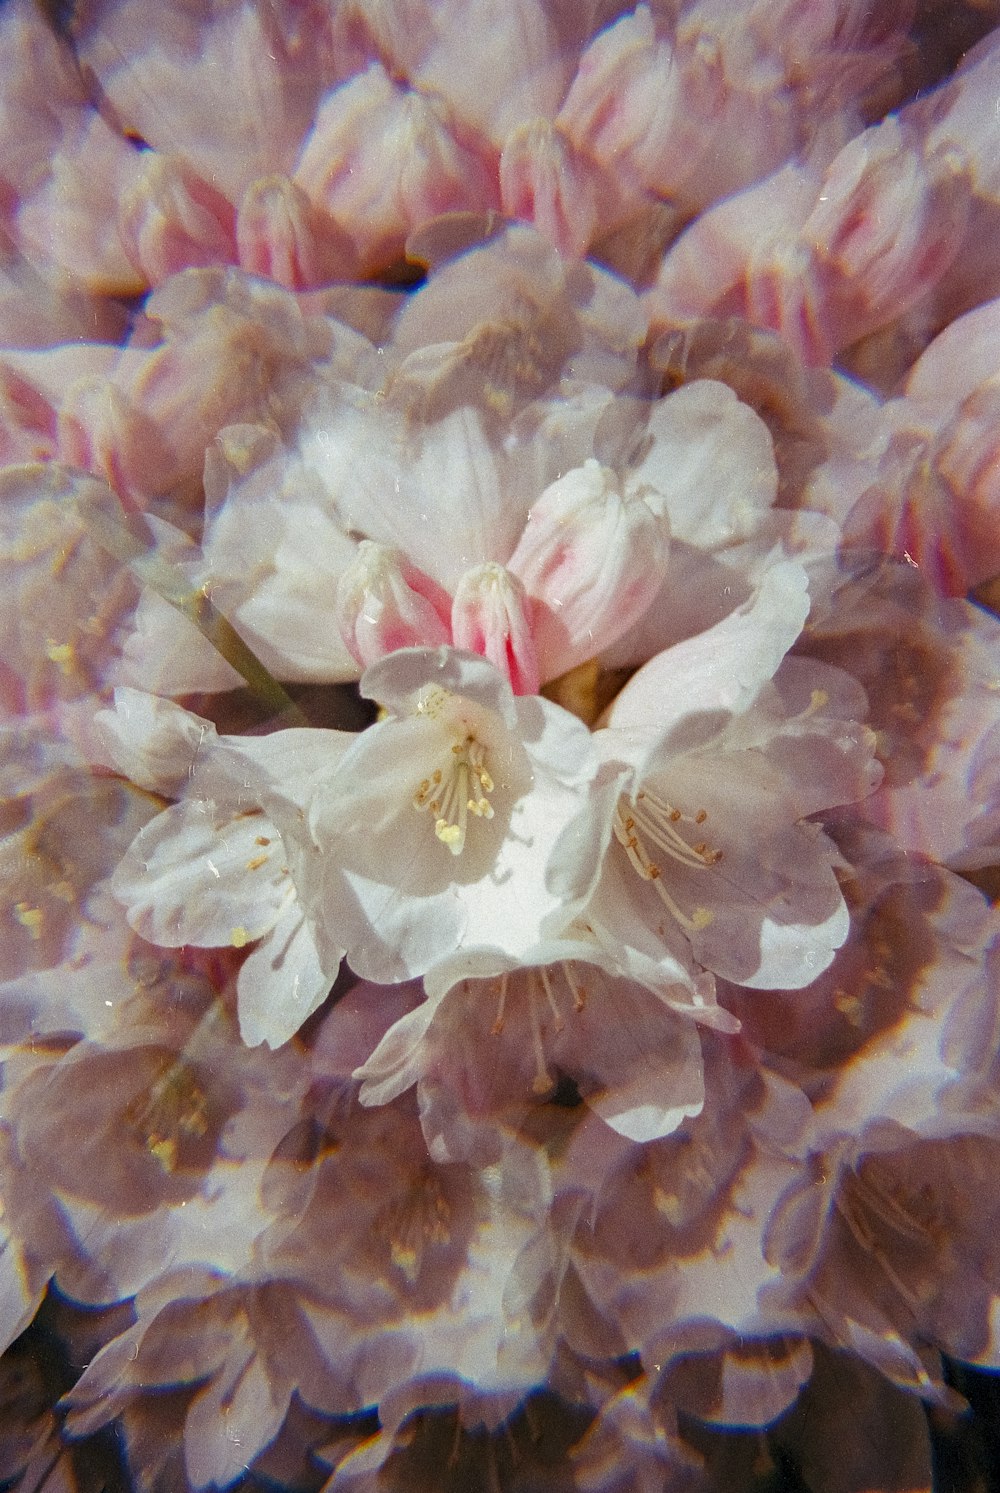  a close up of a white flower with pink petals